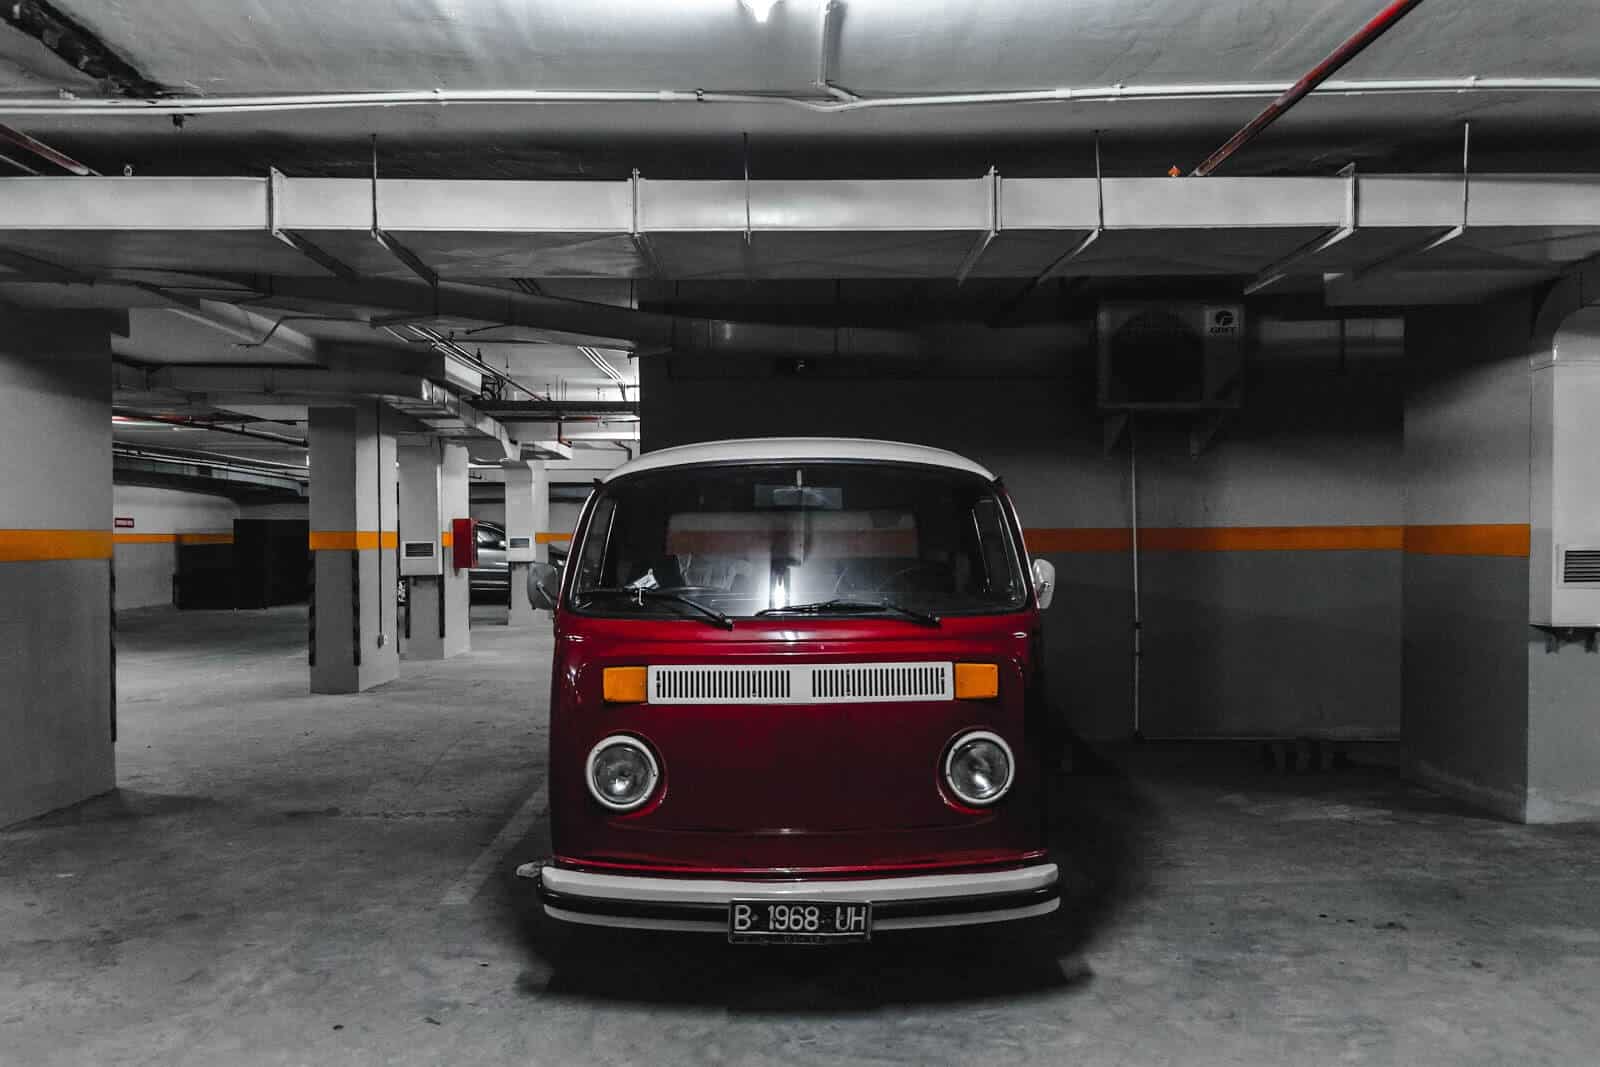 VW bus parked in a parking structure